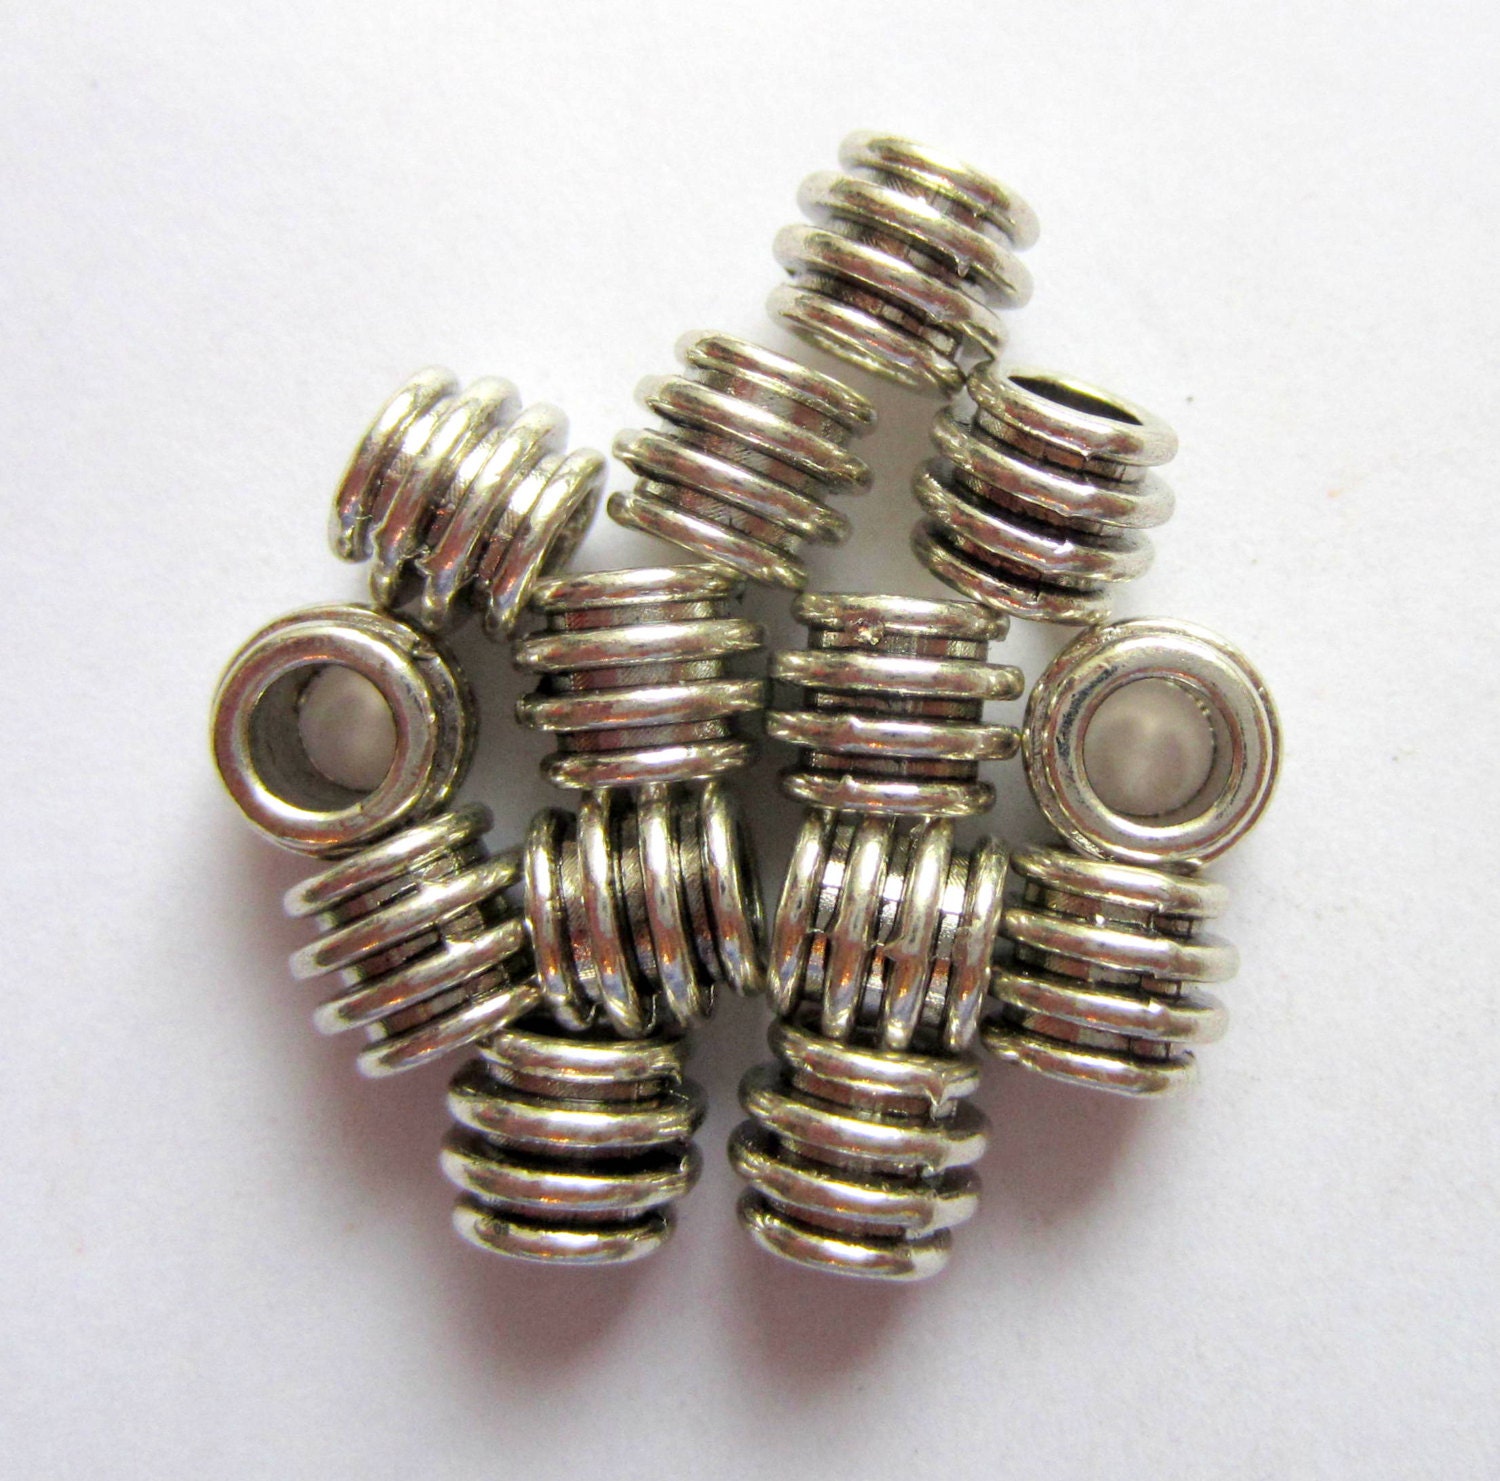 24 Antique silver metal beads textured spacers 6mm x 8mm tibetan style rondelle beads large hole k0nz